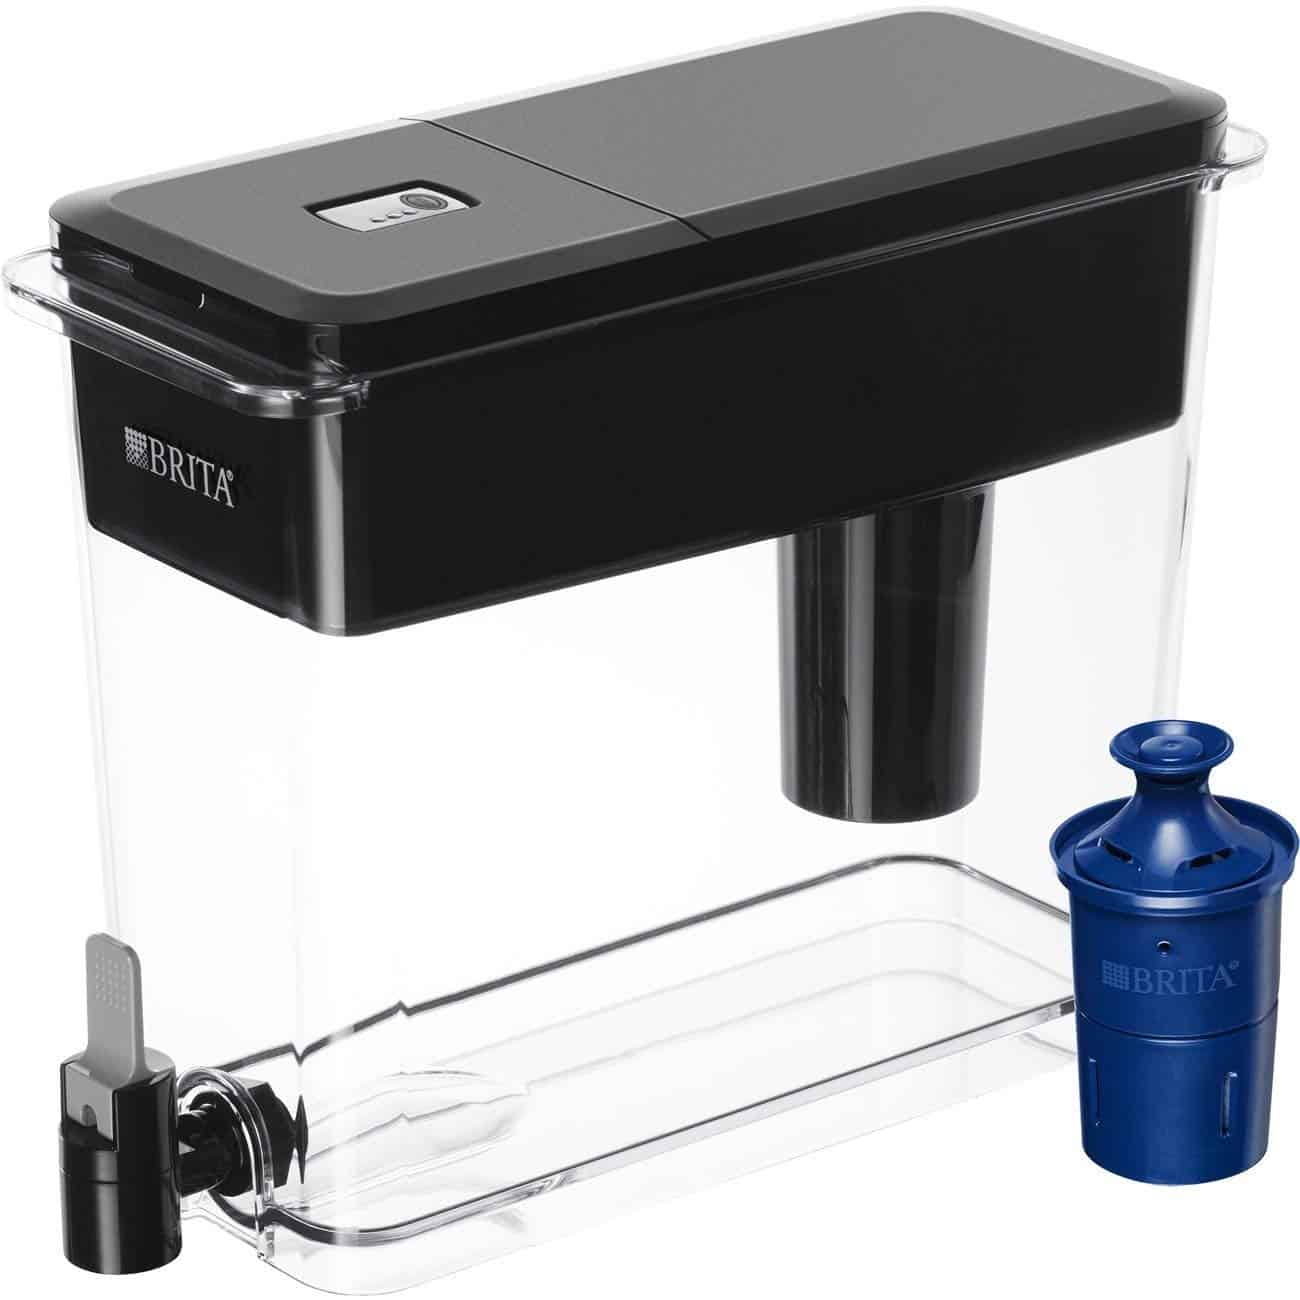 5 Brita Water Filters To Help You Drink More Water 2